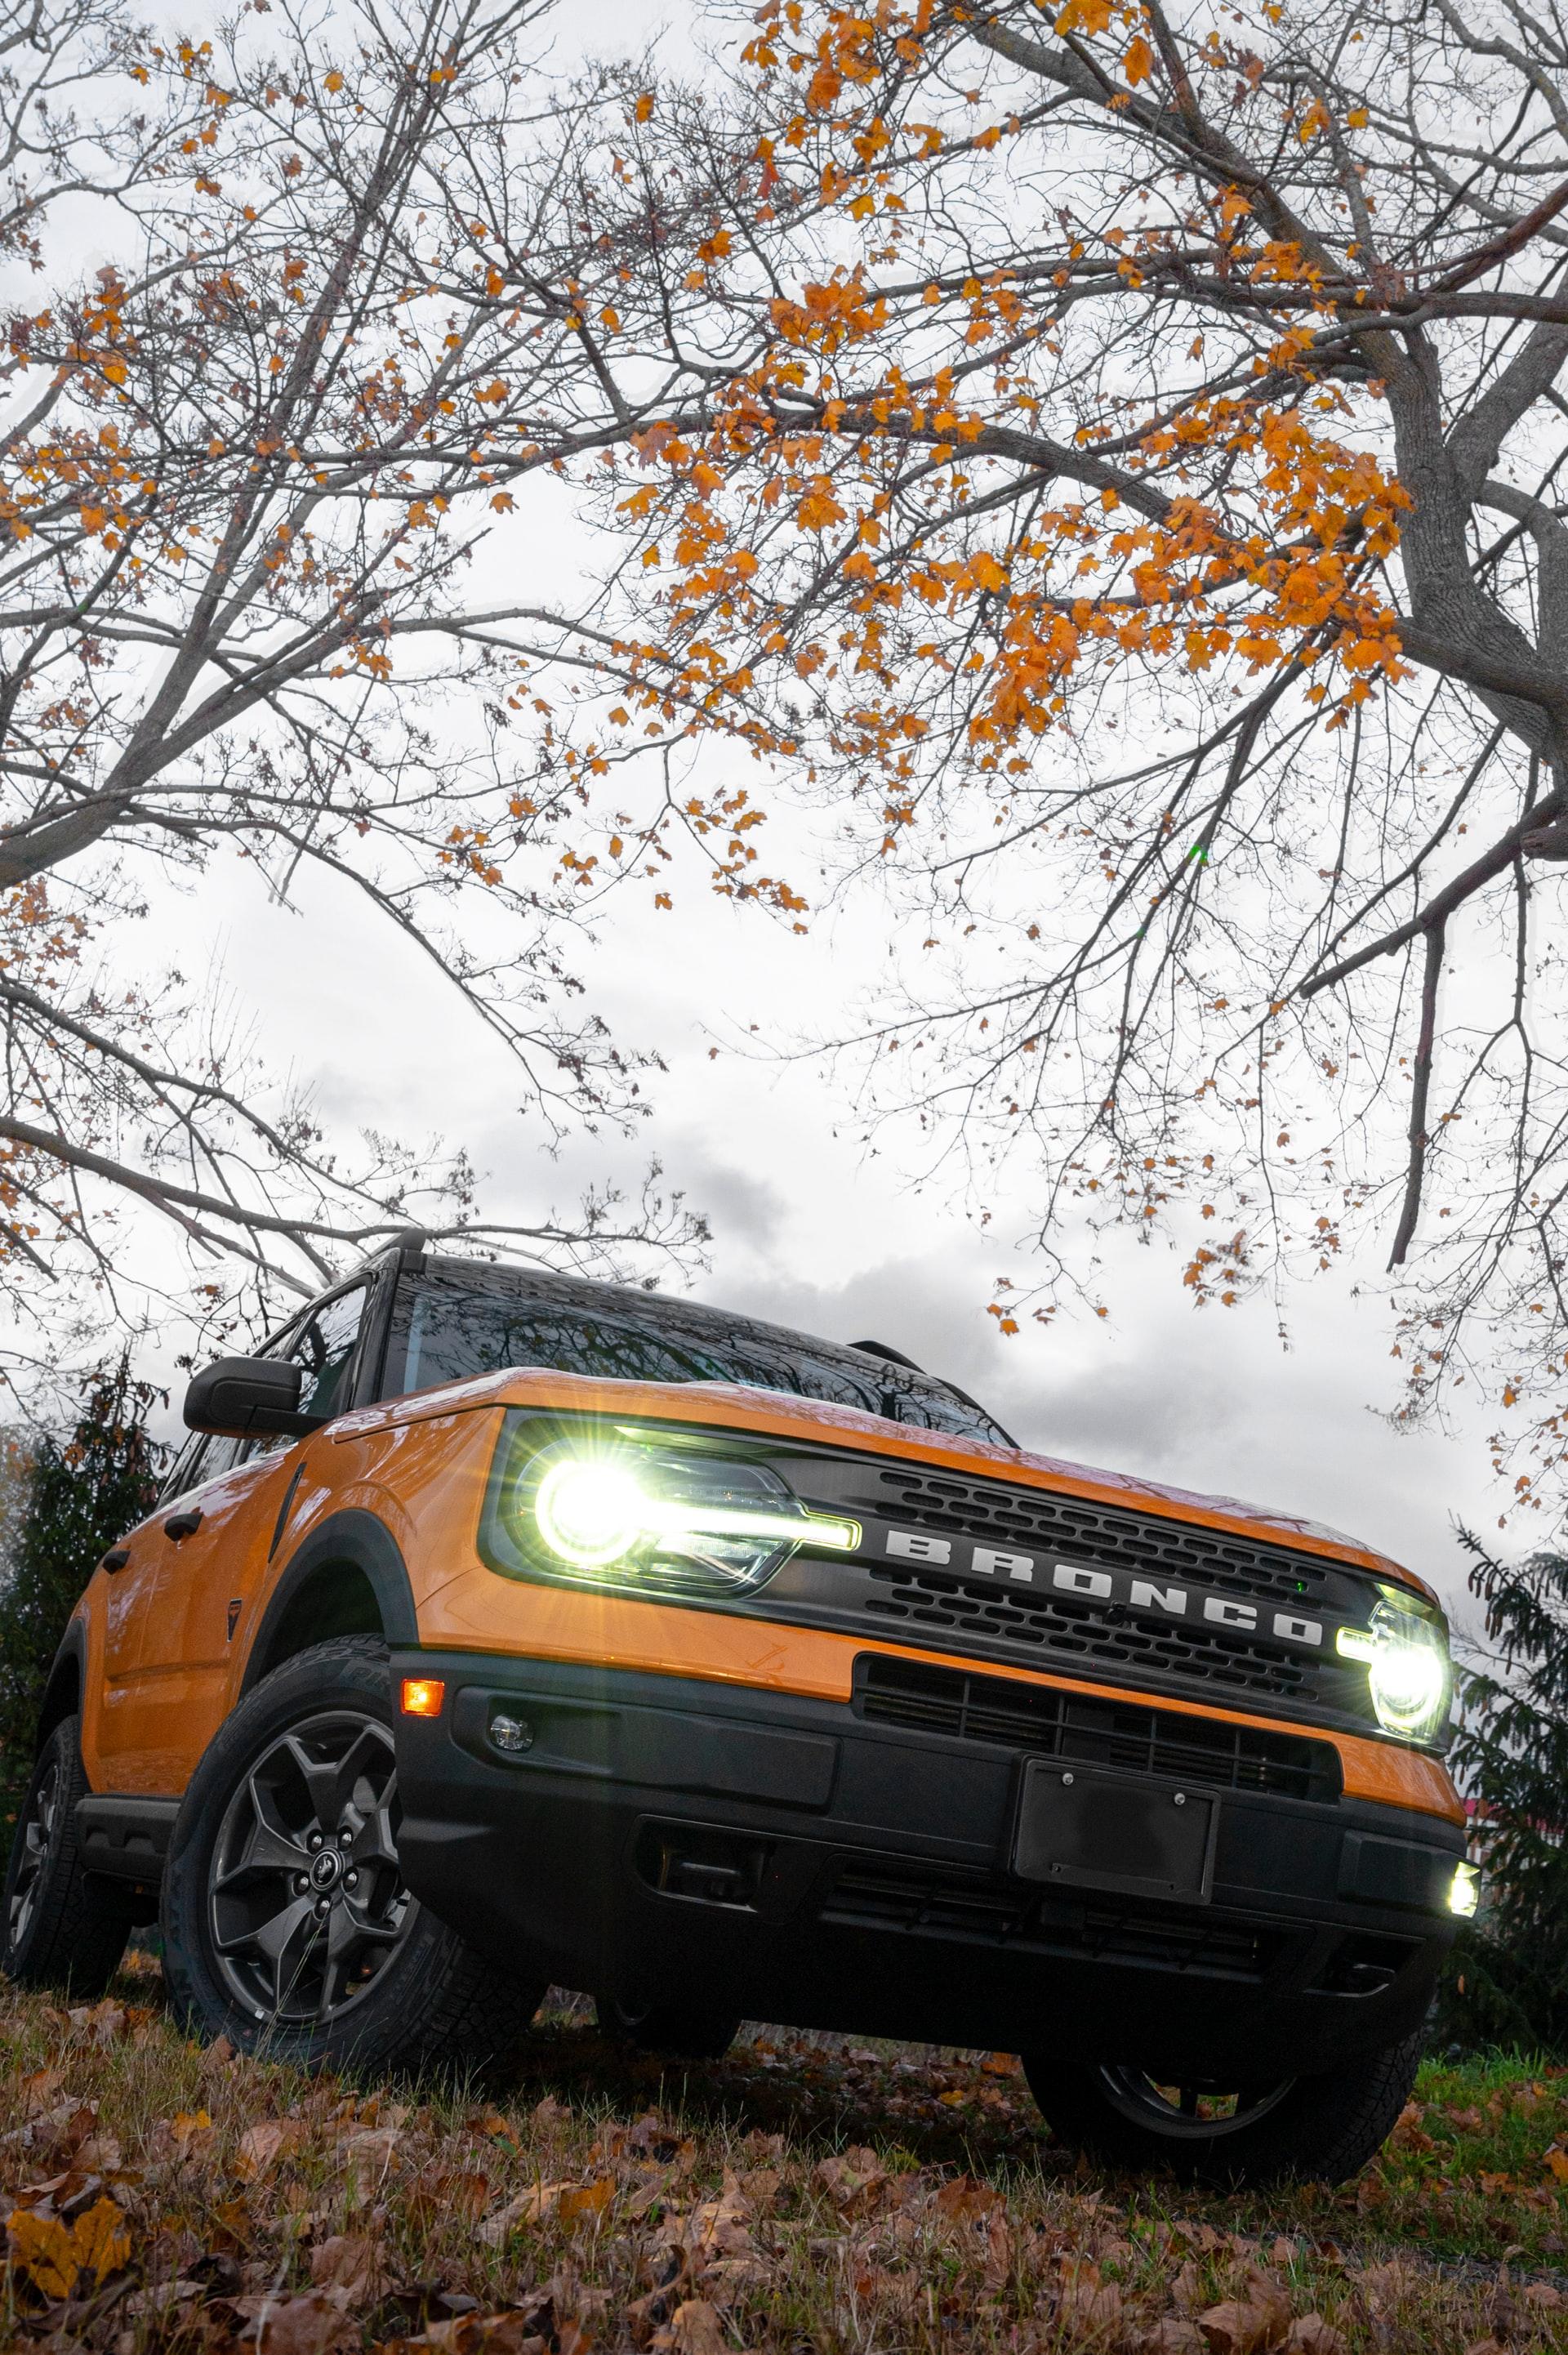 Both the Bronco and Bronco Sport have solid off-roading capabilities.